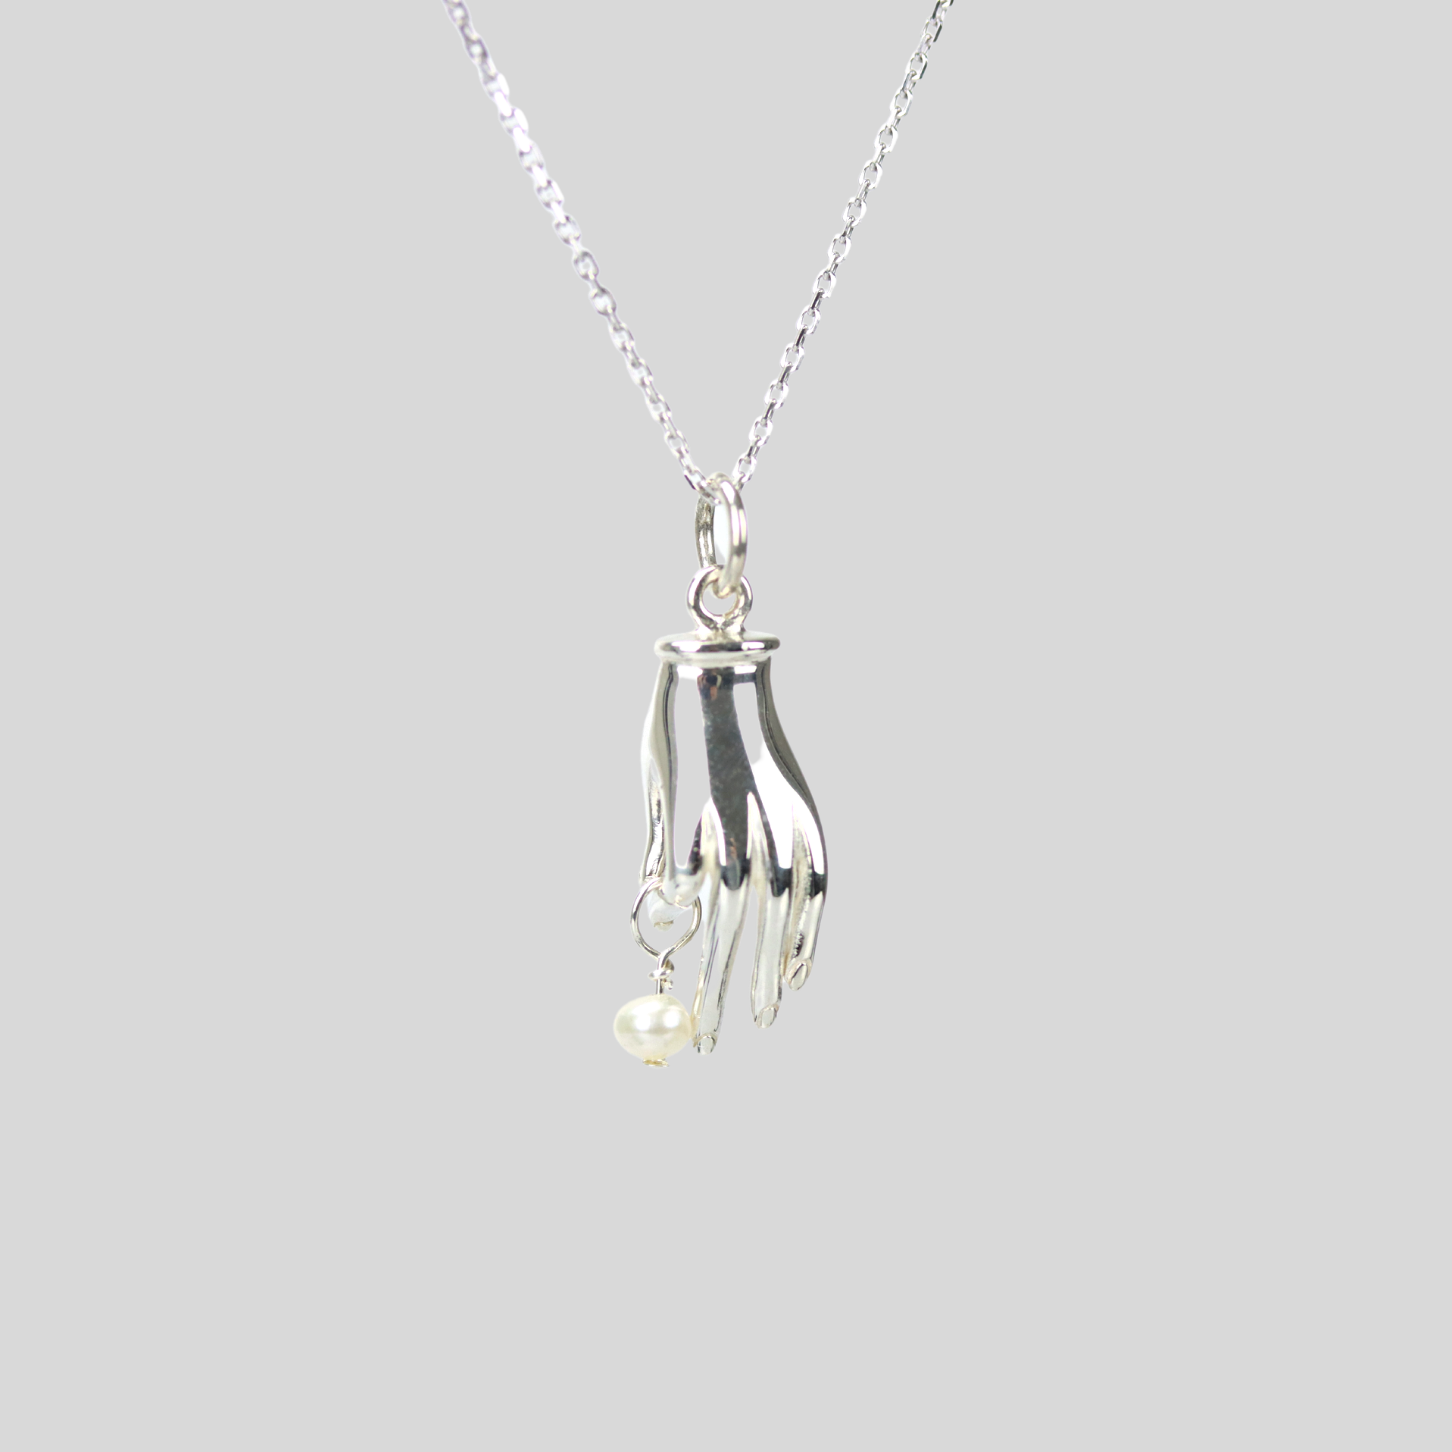 Holding hand necklace with dangling pearl